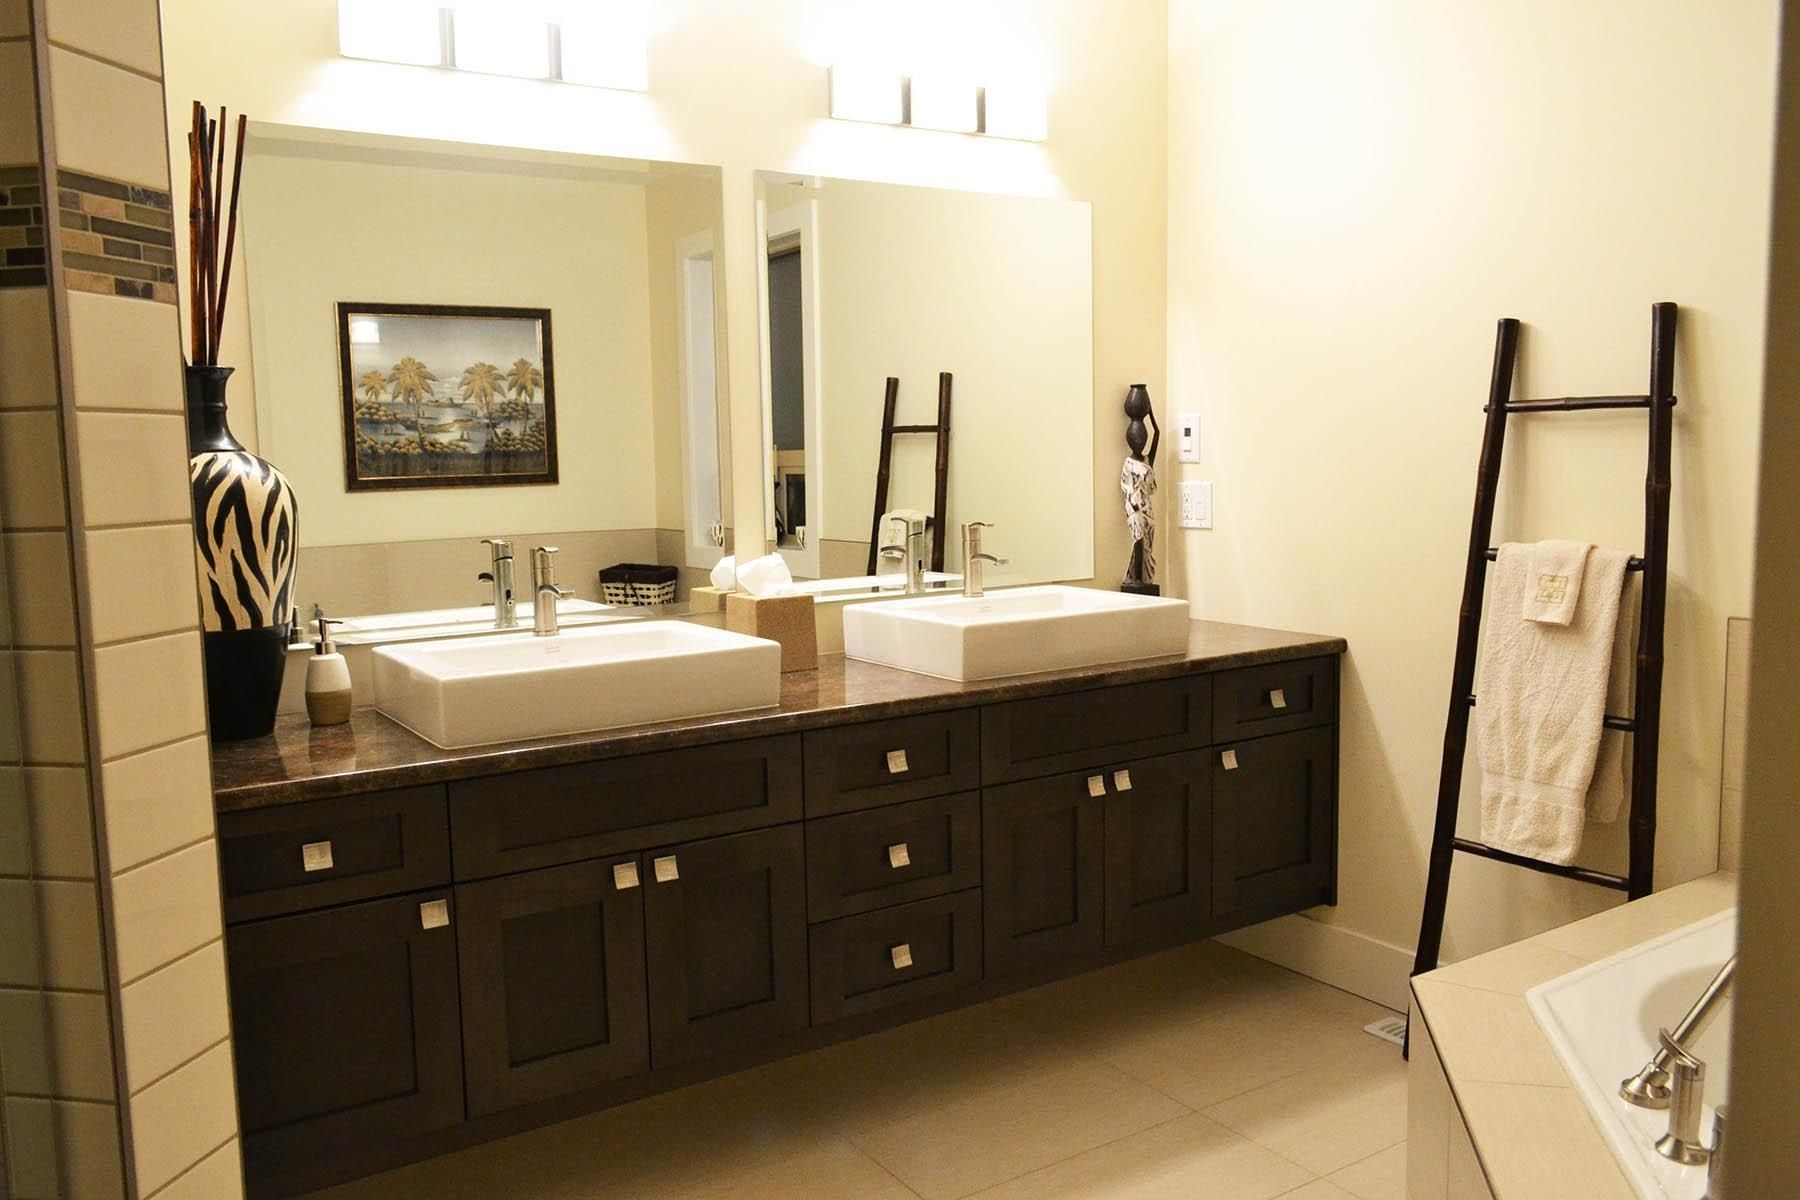 Bathroom Cabinets : Vibrant Creative Double Bathroom Cabinets For Bathroom Mirrors Ideas With Vanity (View 5 of 20)